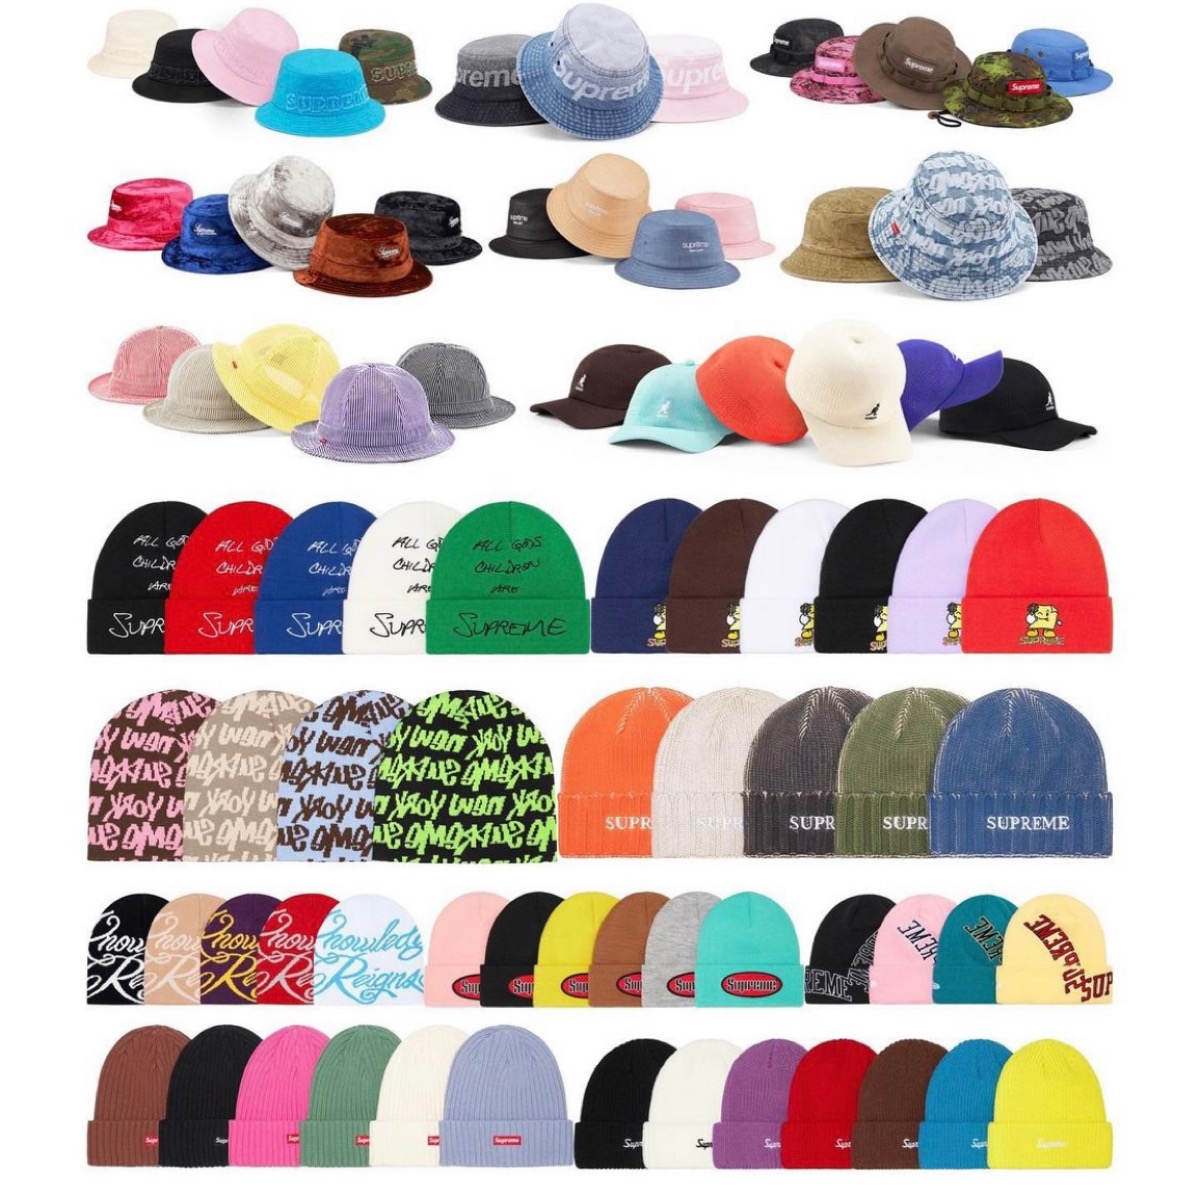 【Supreme】2022SSコレクションに発売予定のビーニー & ハット（Beanie / Hat） | UP TO DATE